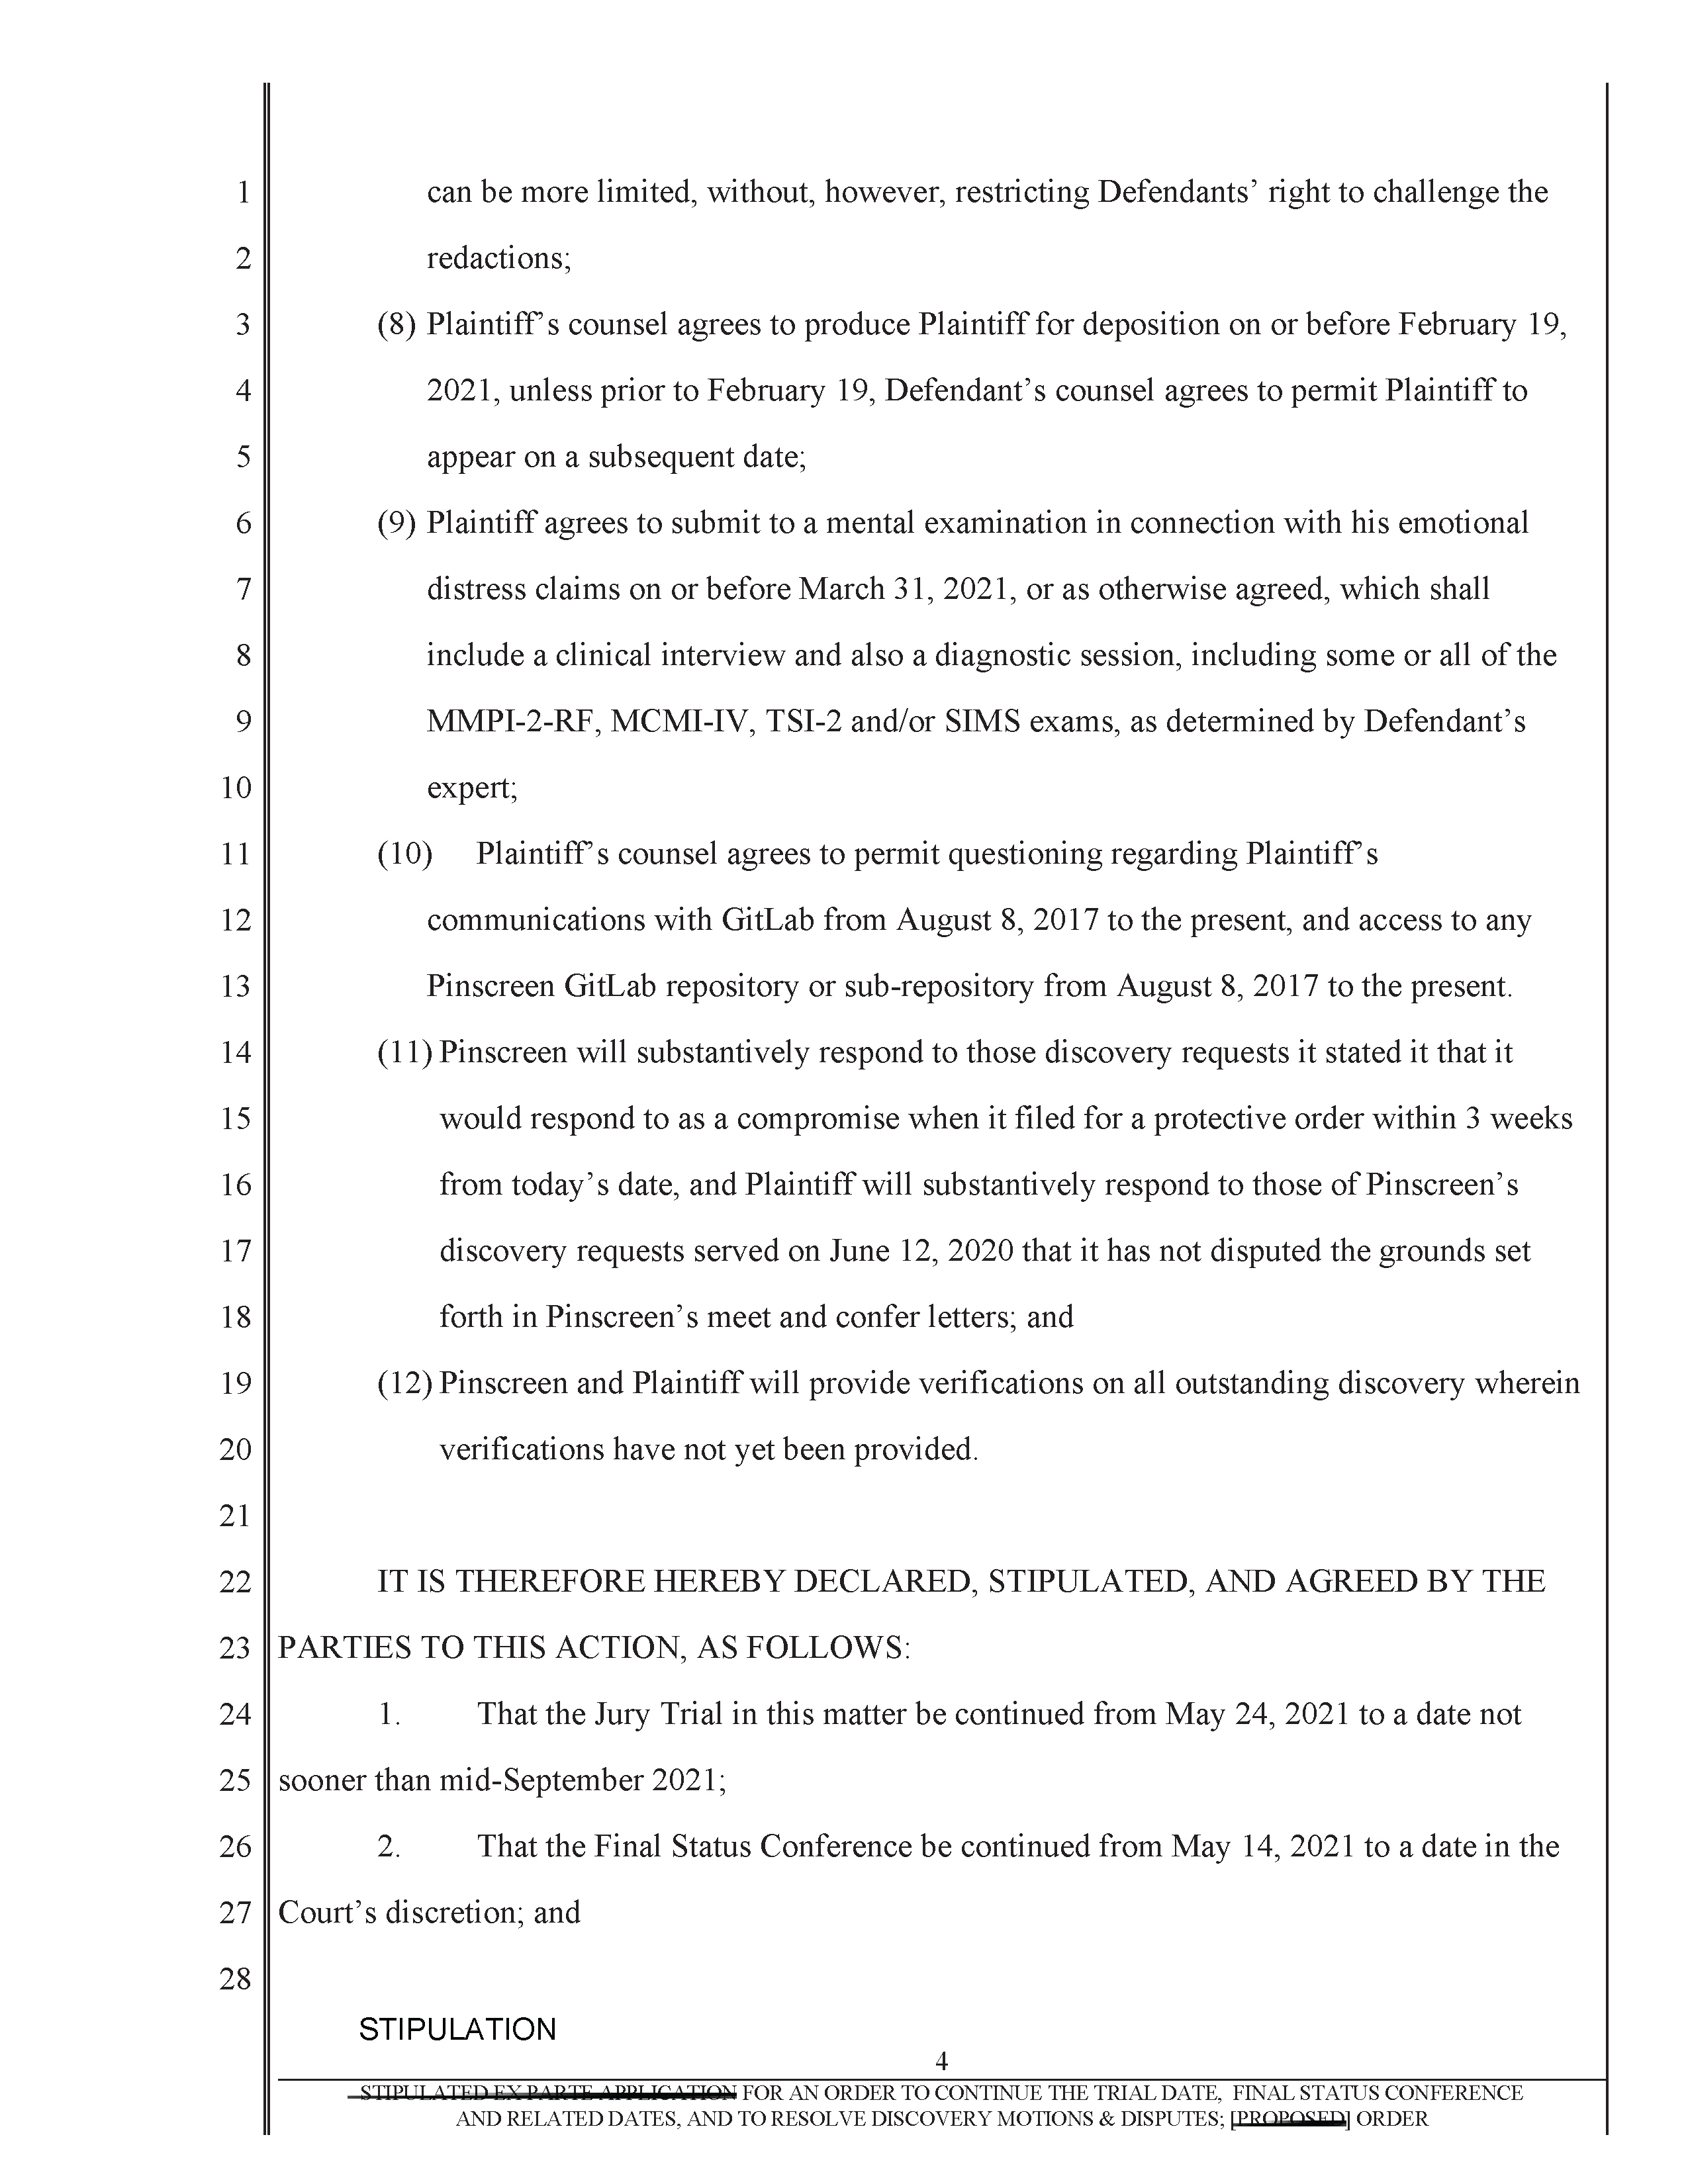 Pinscreen’s Motion to Seal USC’s Investigation of Hao Li’s Scientific Misconduct Page 93